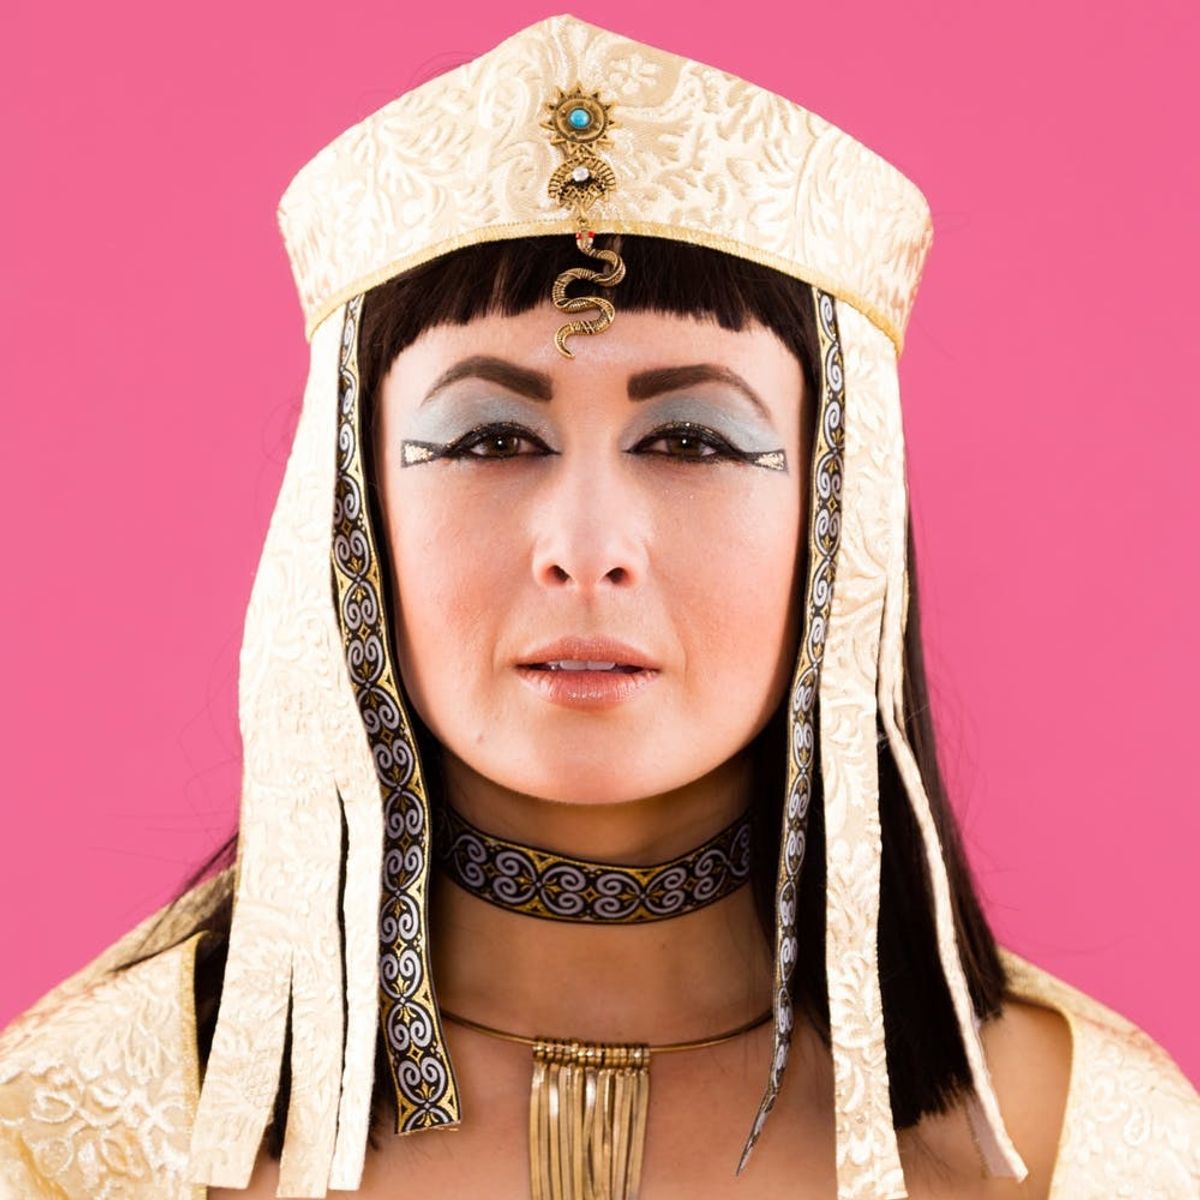 Get Your Diy Skills In Order — This Cleopatra Costume Is For The Advanced Brit Co